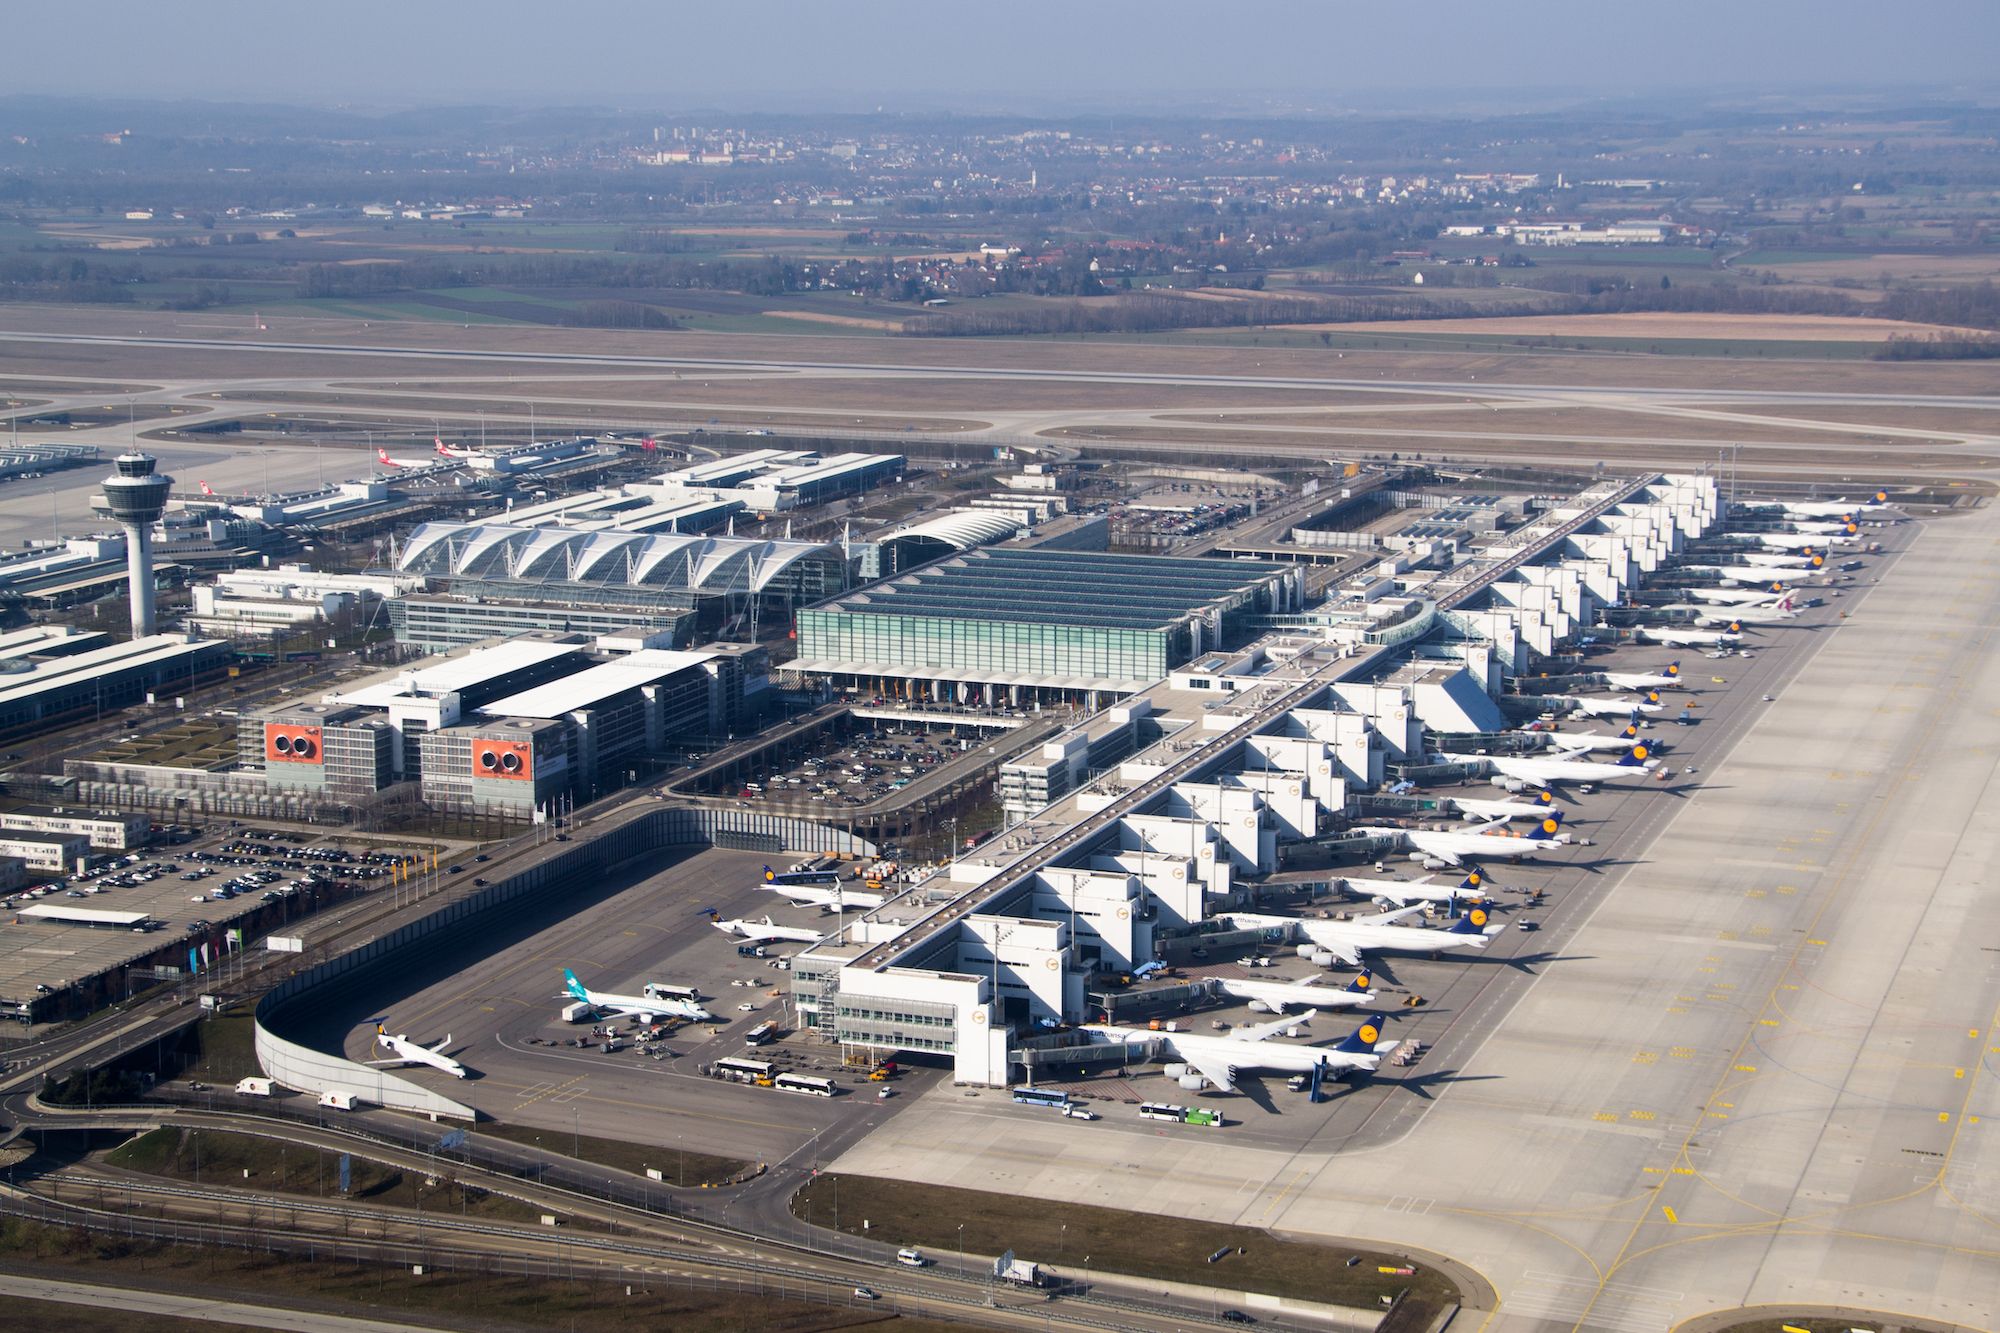 An aerial view of Munich Airport's terminals and gates.